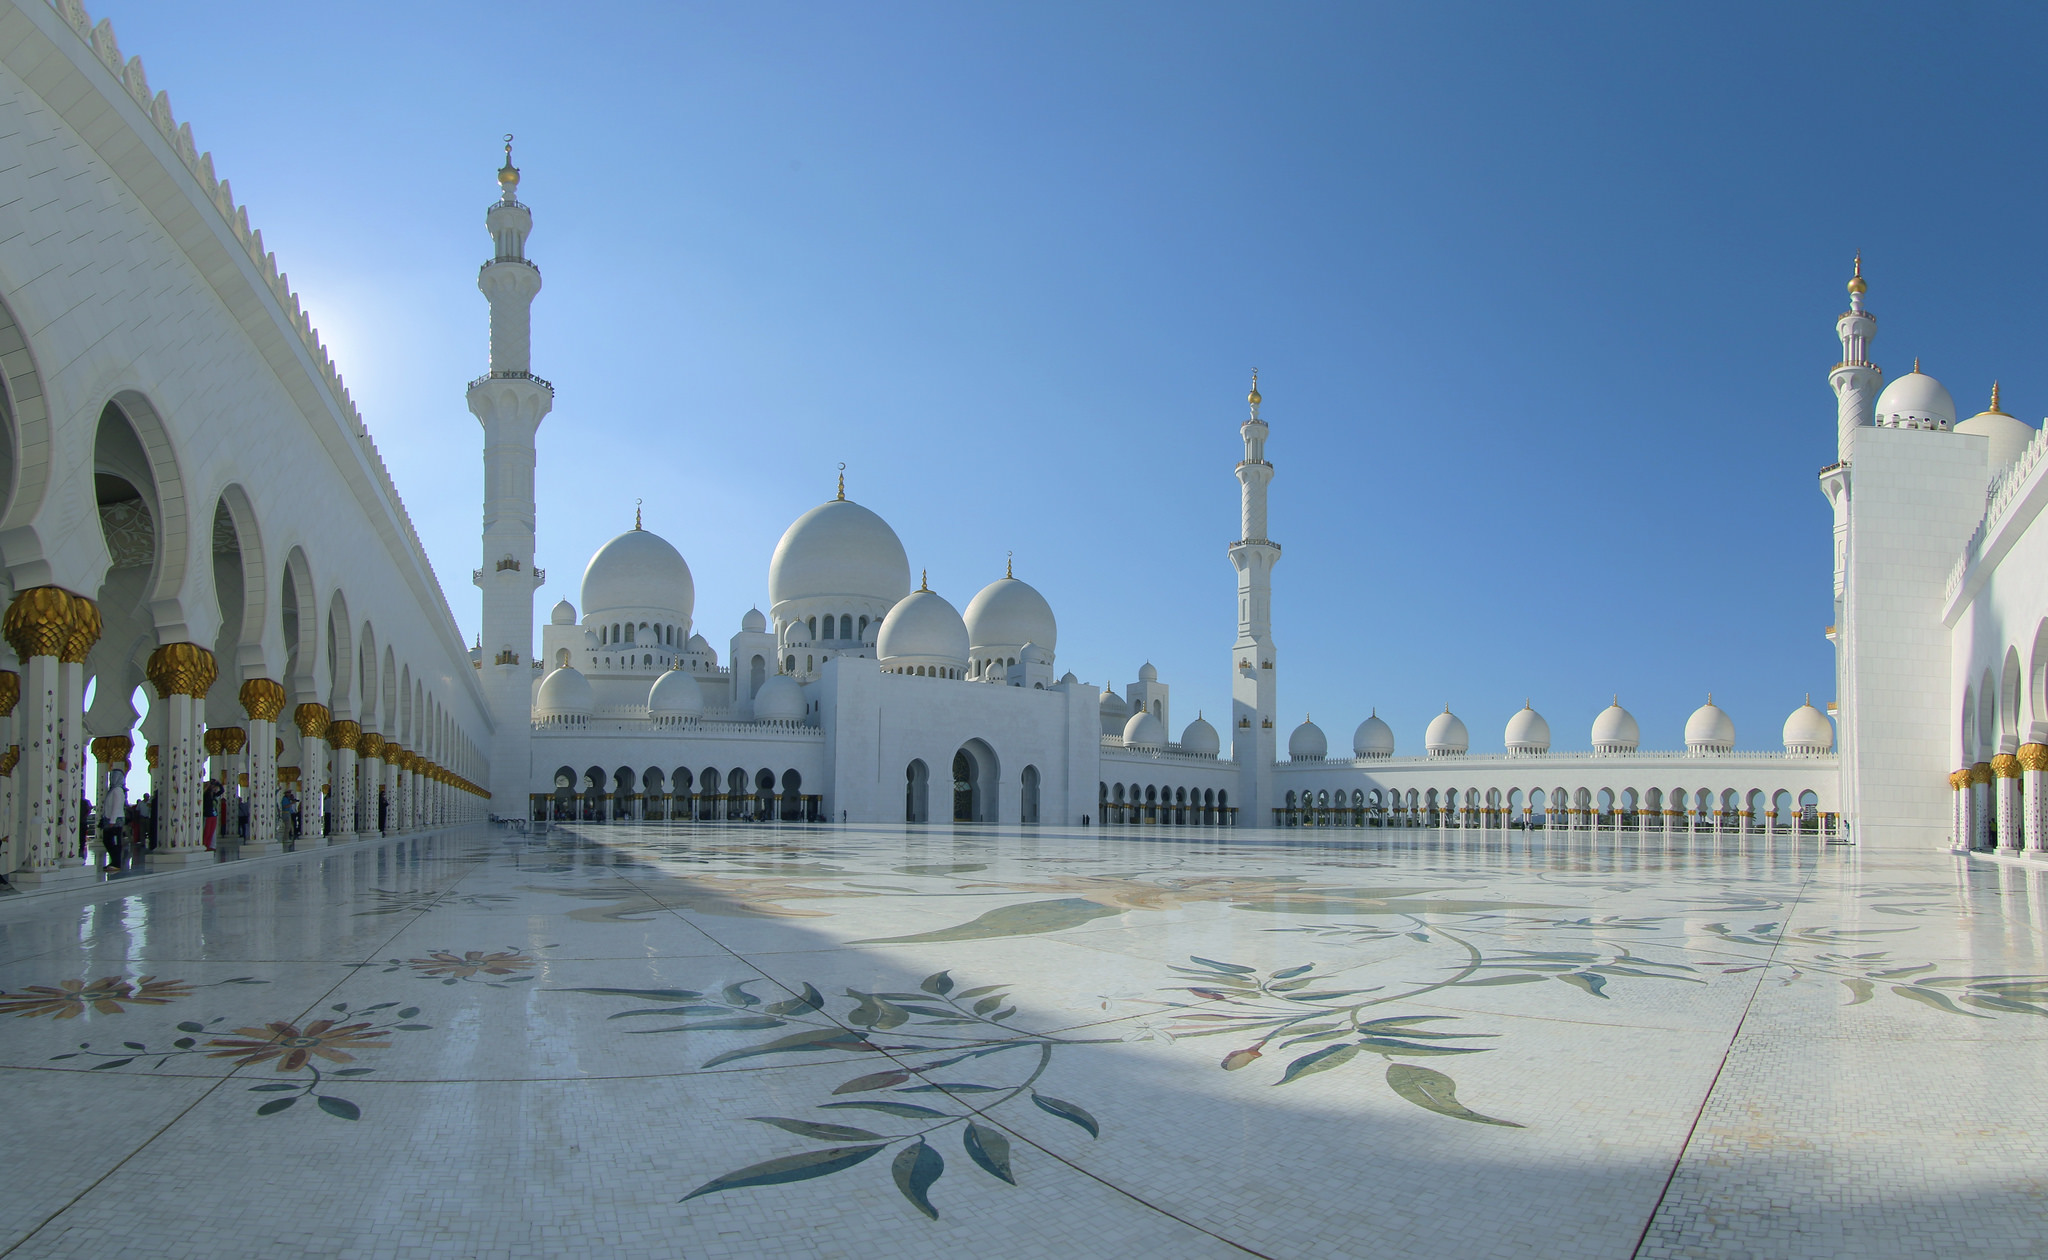 mosque, architecture, religious, sheikh zayed grand mosque, abu dhabi, dome, place, united arab emirates, mosques FHD, 4K, UHD